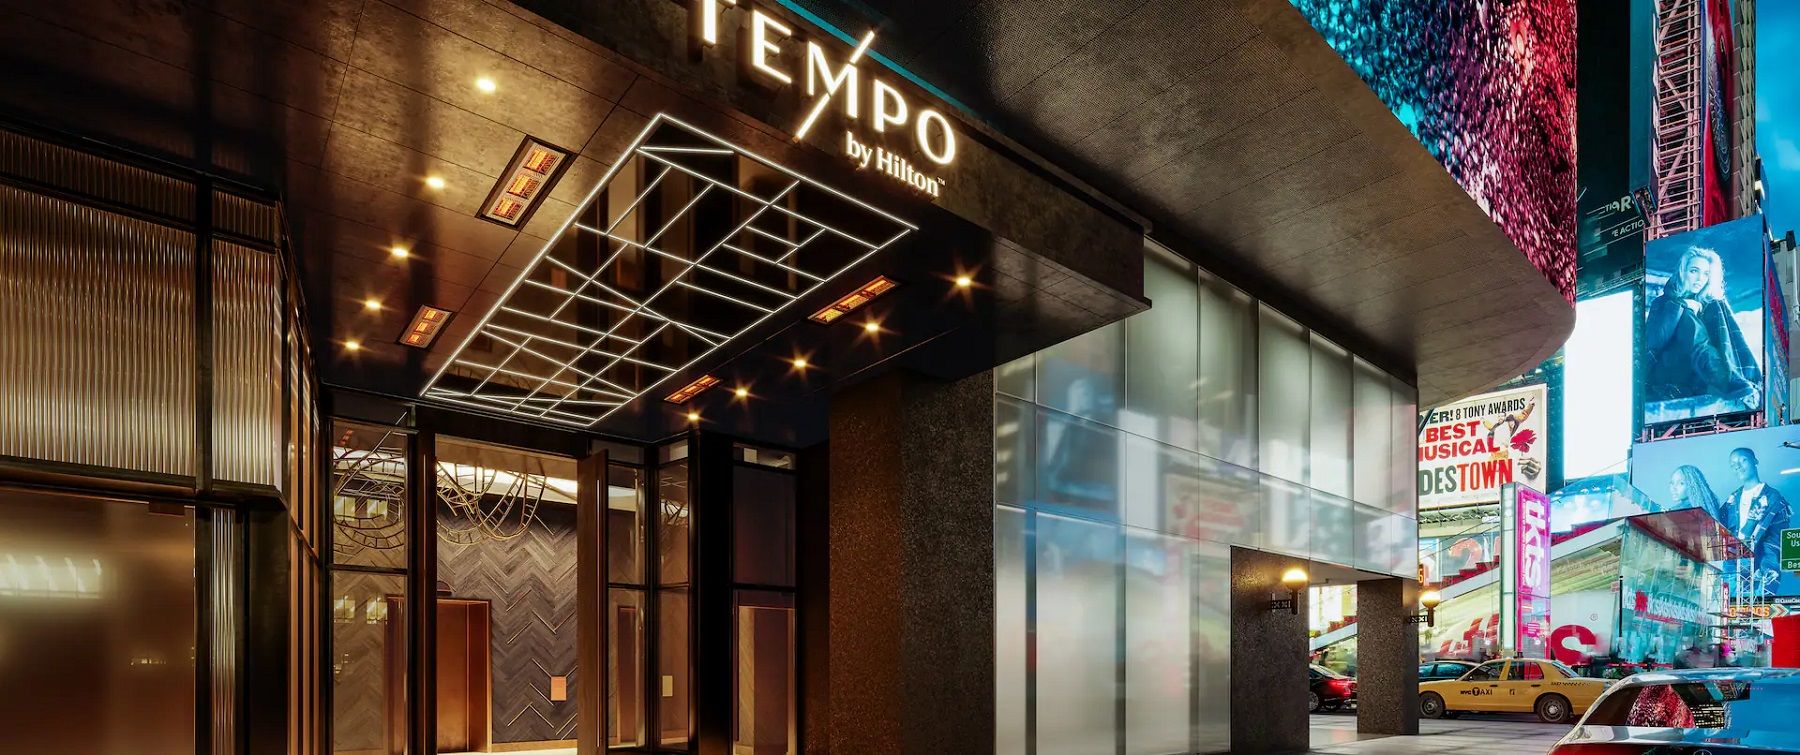 Tempo by Hilton New York Times Square 1